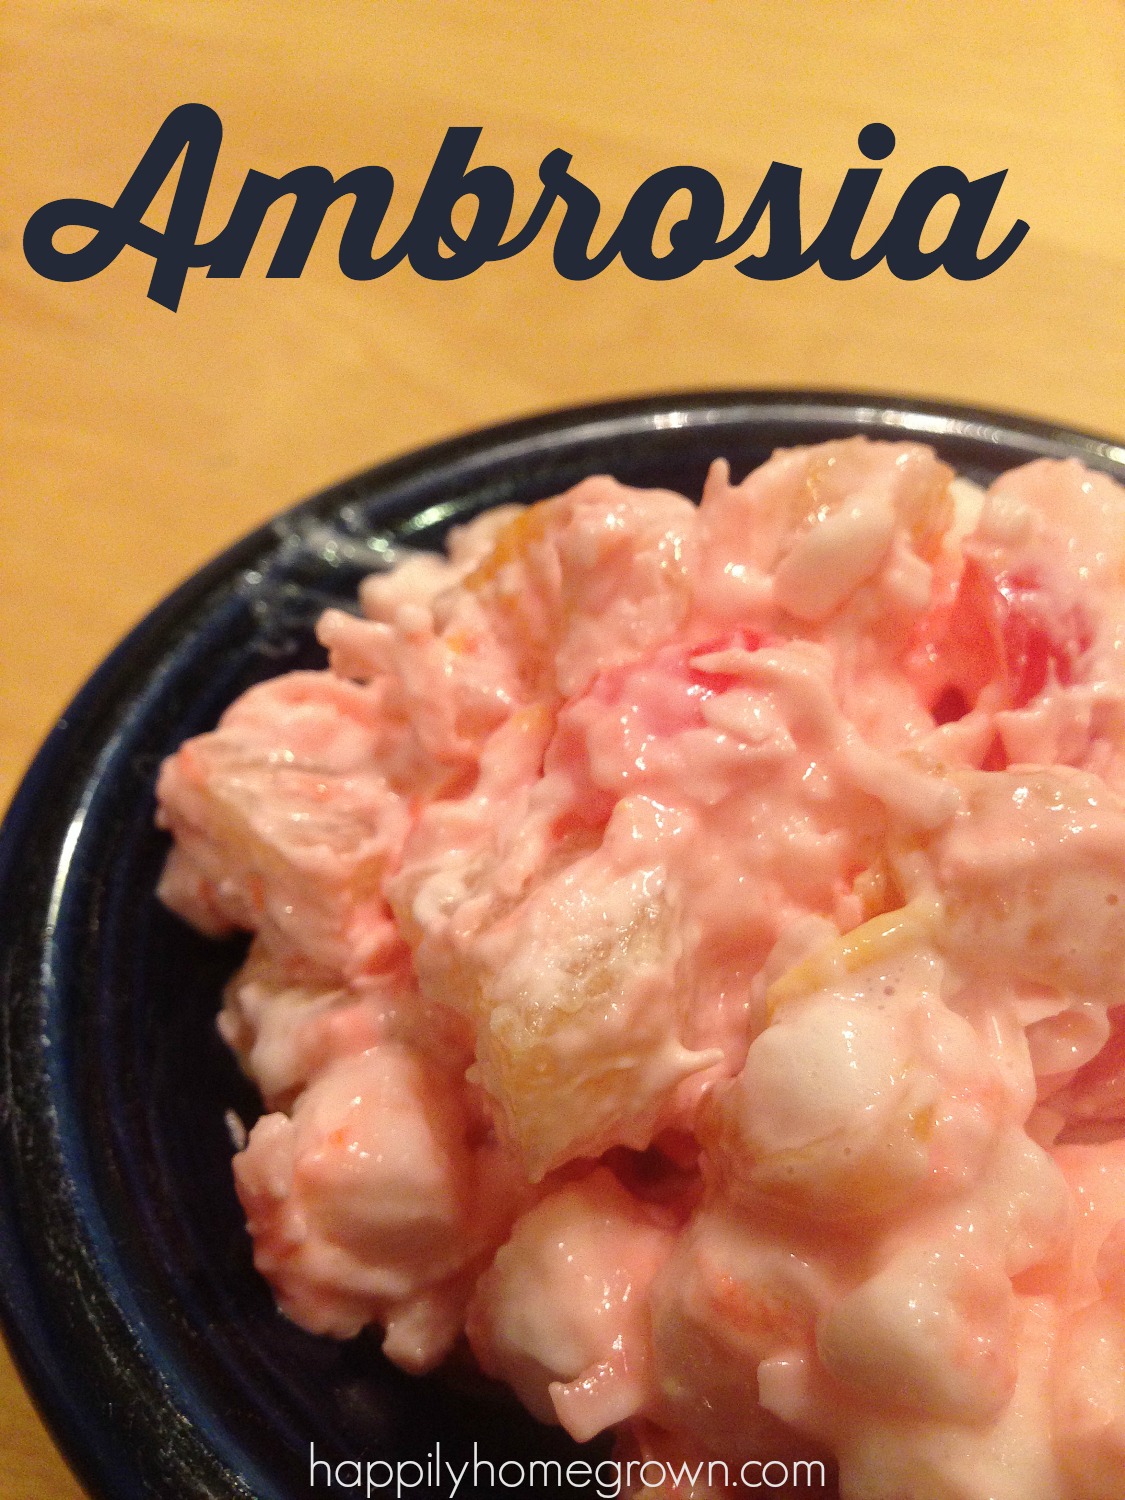 Ambrosia is said to be the food of the Gods in mythology. We just think its the perfect addition to our Easter menu, and every BBQ through out the summer.